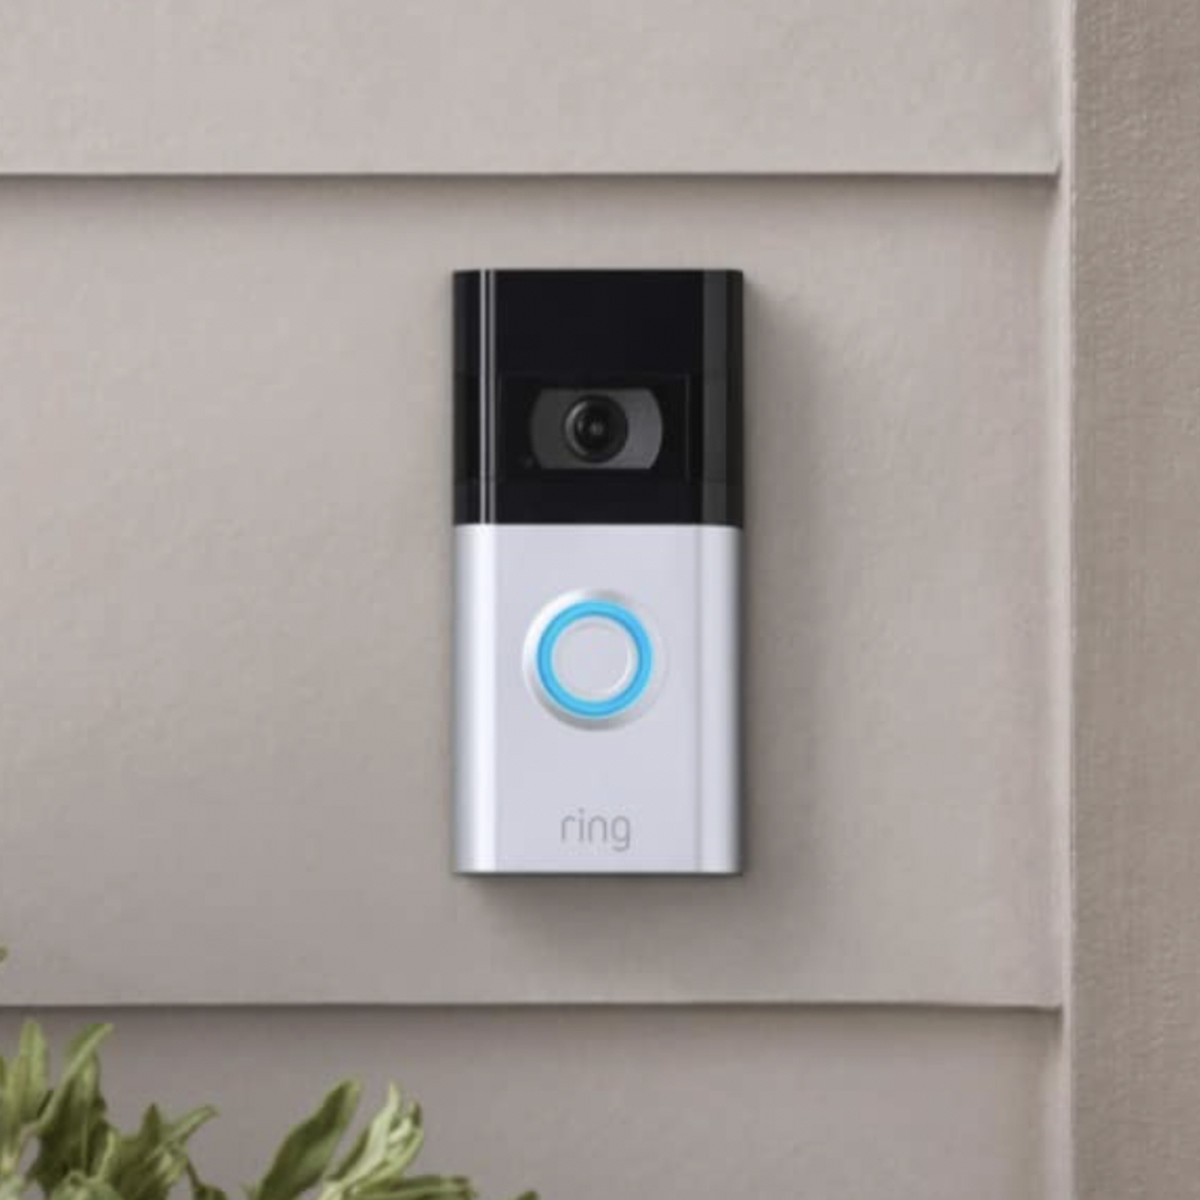 Eufy’s Dual video doorbell is $50 off and doesn’t require a monthly fee ...